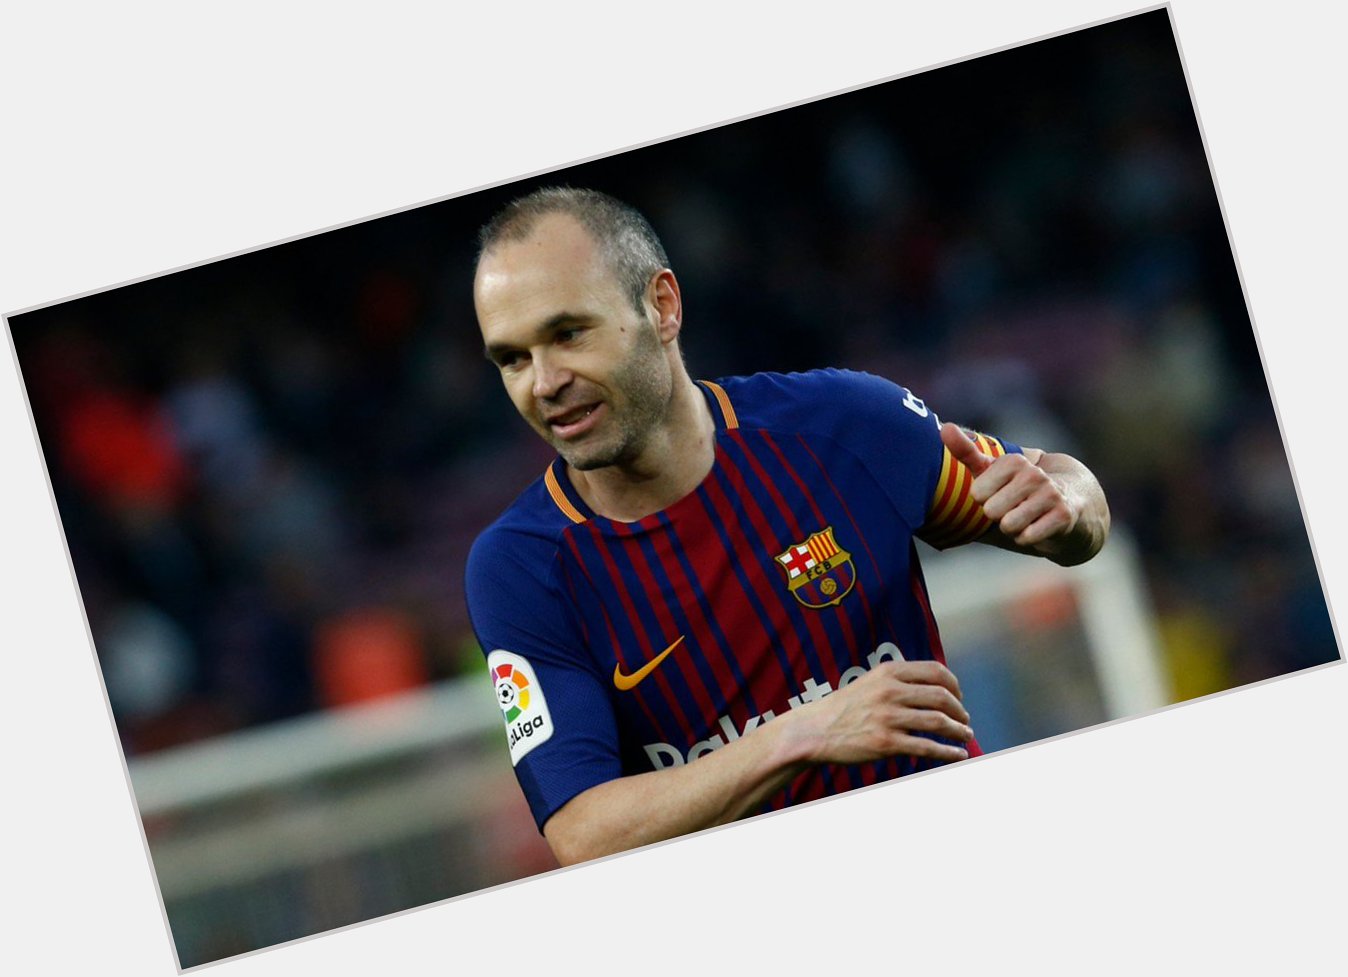 Happy birthday to Barcelona and Spain legend Andres Iniesta, who turns 34 today! 